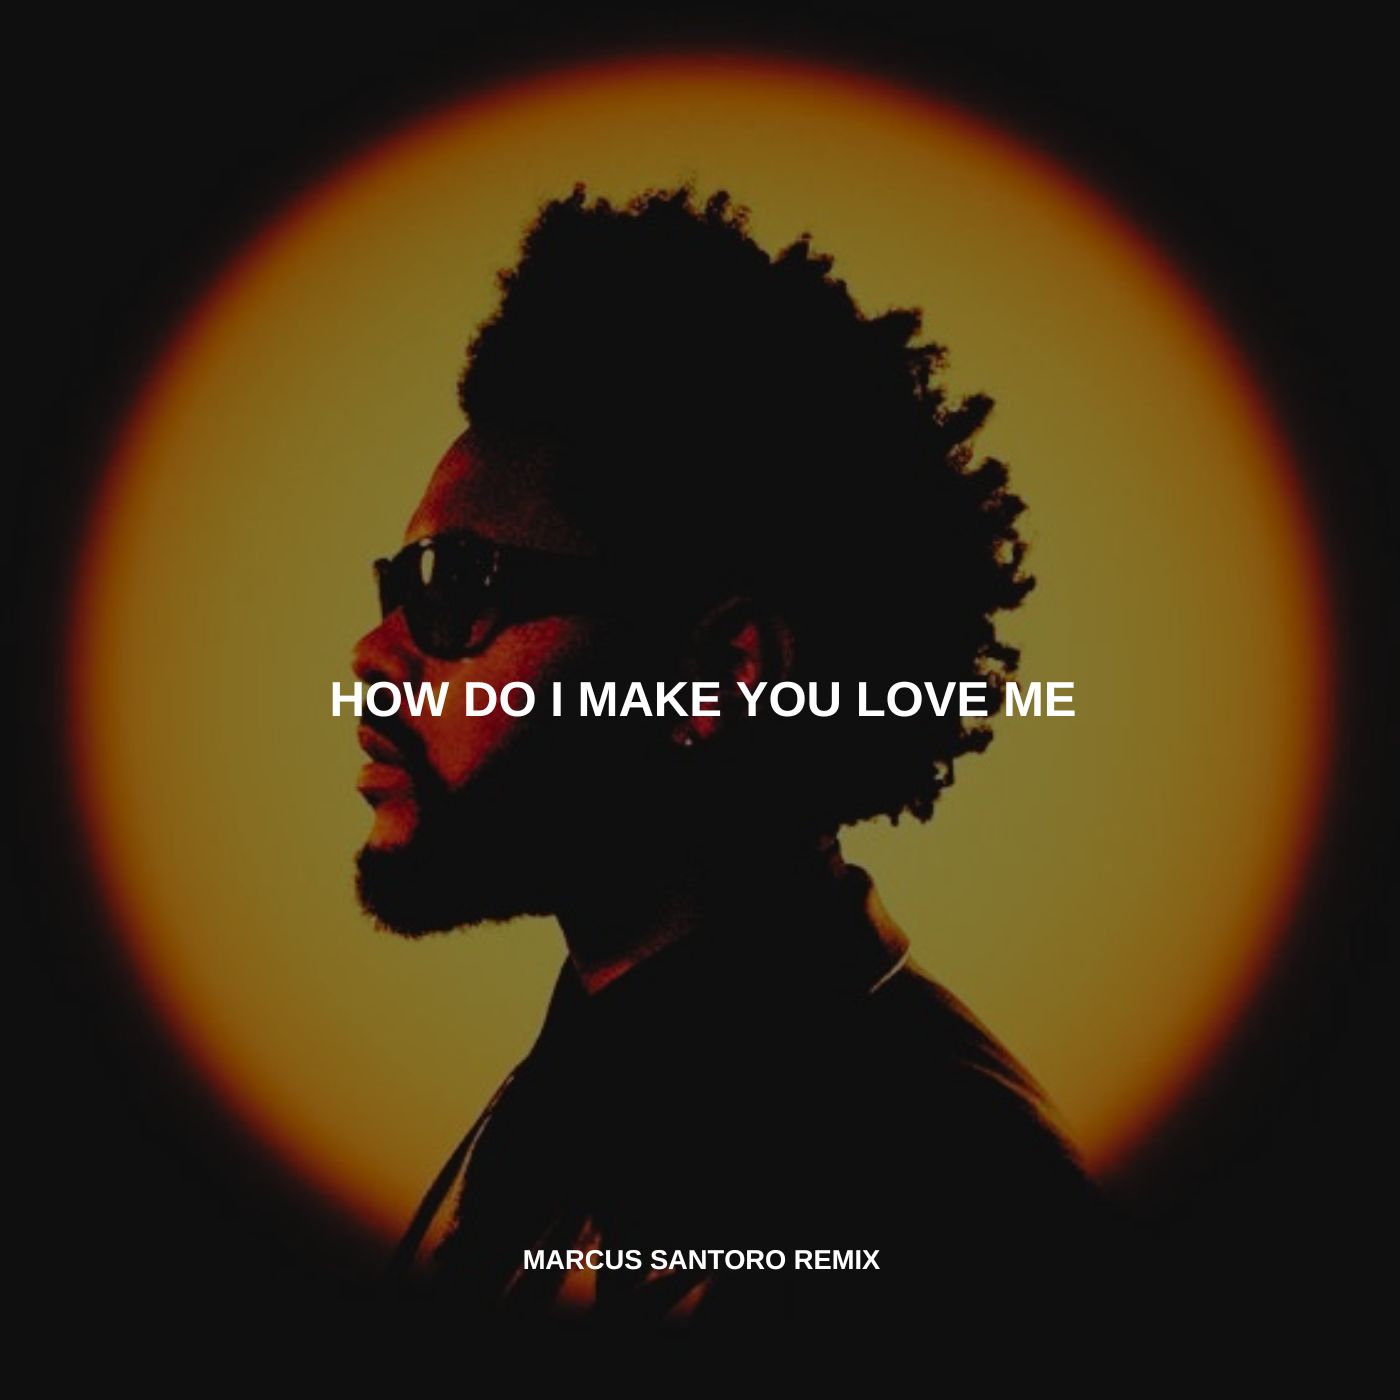 Download The Weeknd - How Do I Make You Love Me (Marcus Santoro Remix) // FREE DOWNLOAD